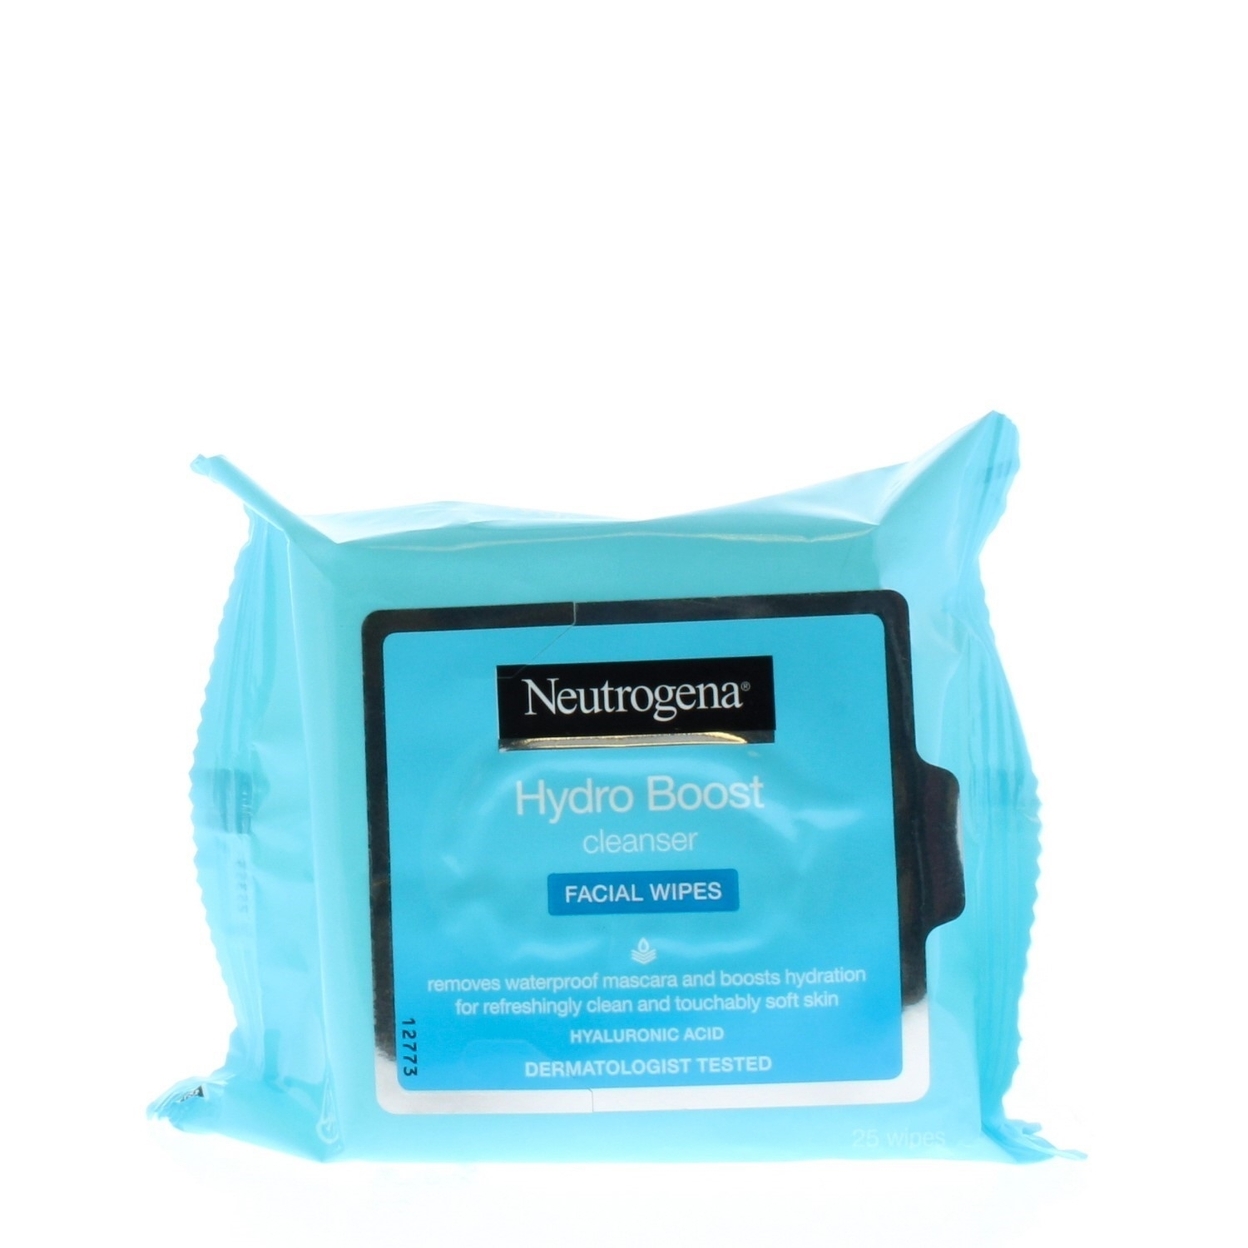 Neutrogena Hydro Boost Cleanser Facial Wipes (25 Wipes)